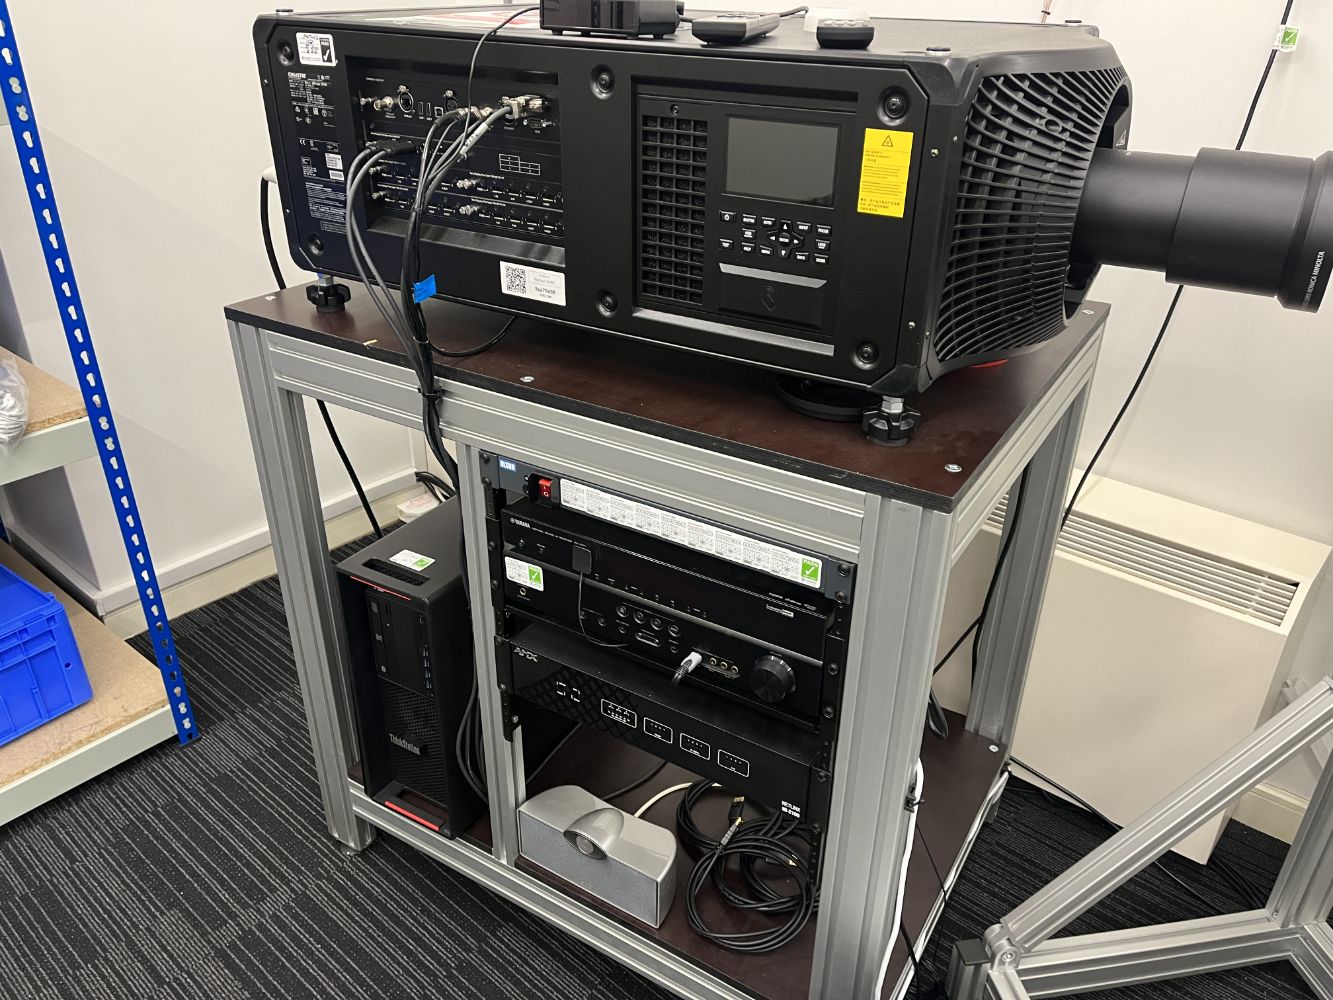 STATE OF THE ART VR MEDIA EQUIPMENT ON BEHALF OF SHEFFIELD UNIVERSITY DUE TO DIVISION REDEVELOPMENT AND UPGRADES